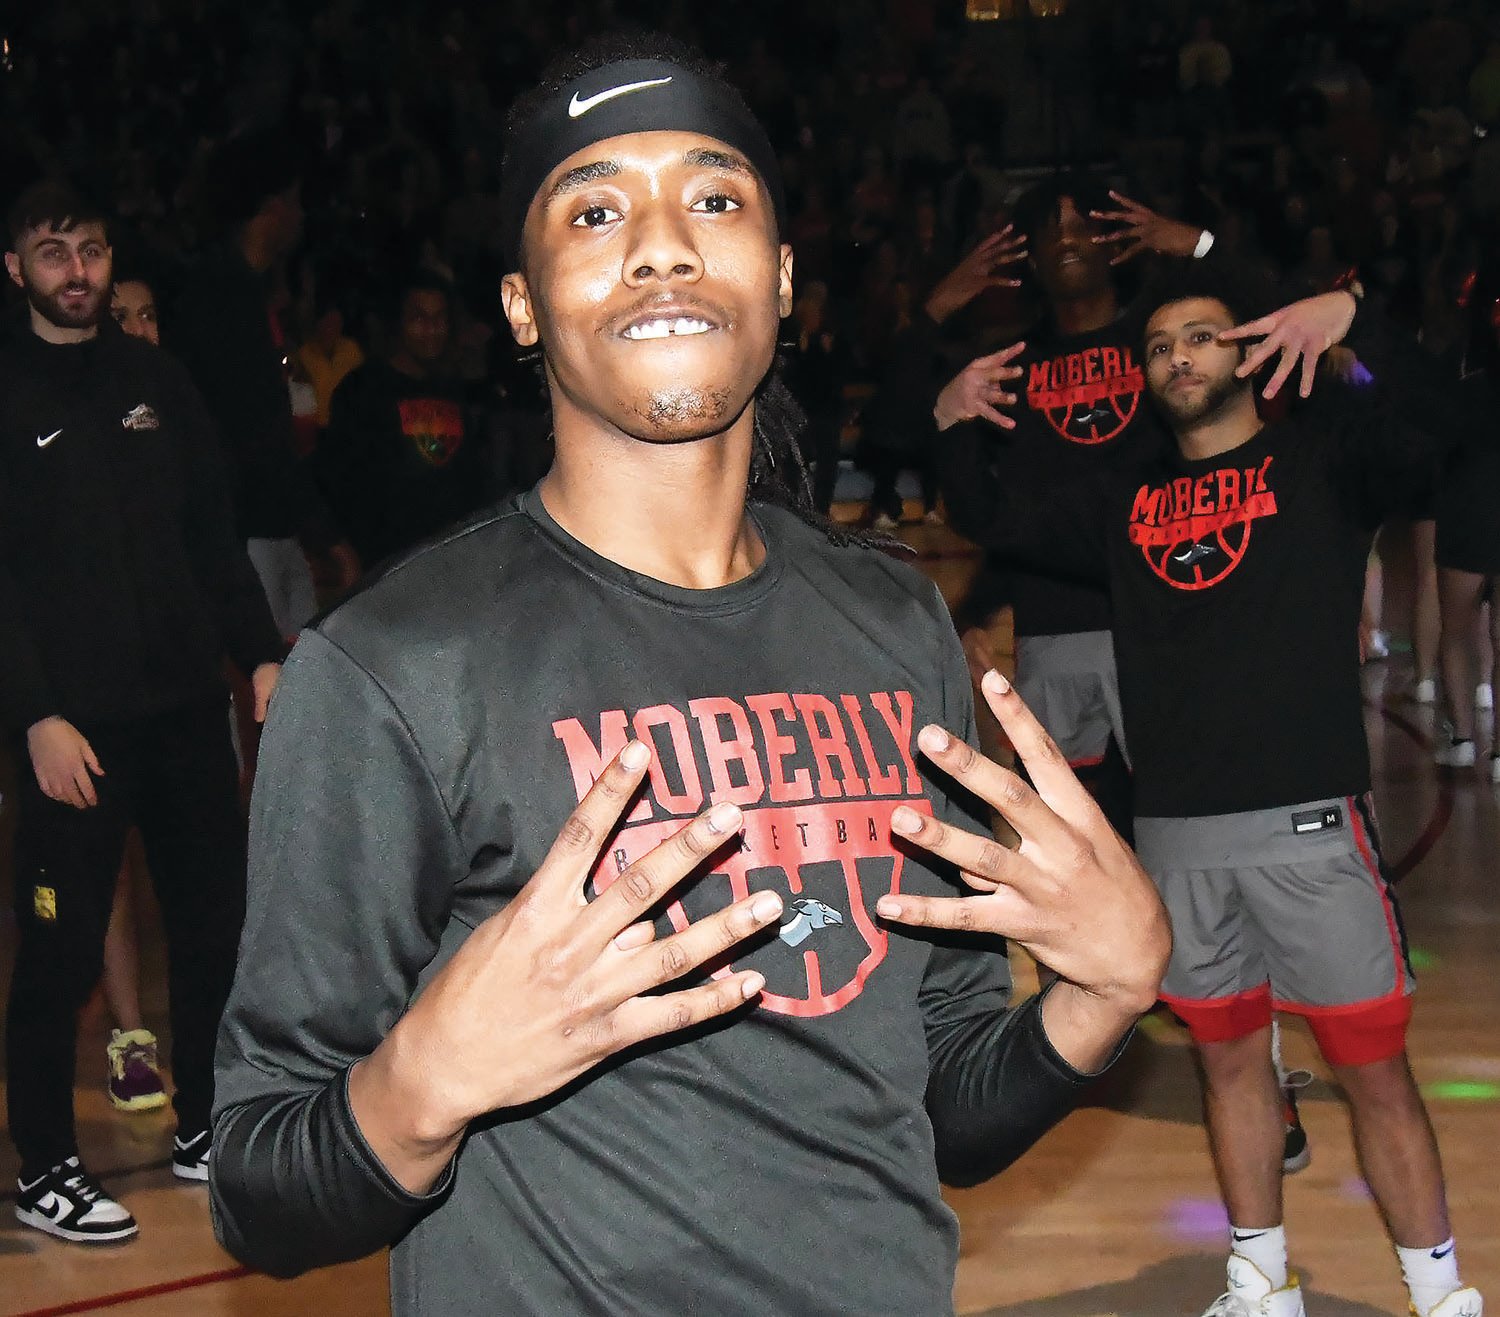 Tedrick Washington, Jr. poses during player introductions. Washington, a Blytheville Chickasaw, scored 19 points.